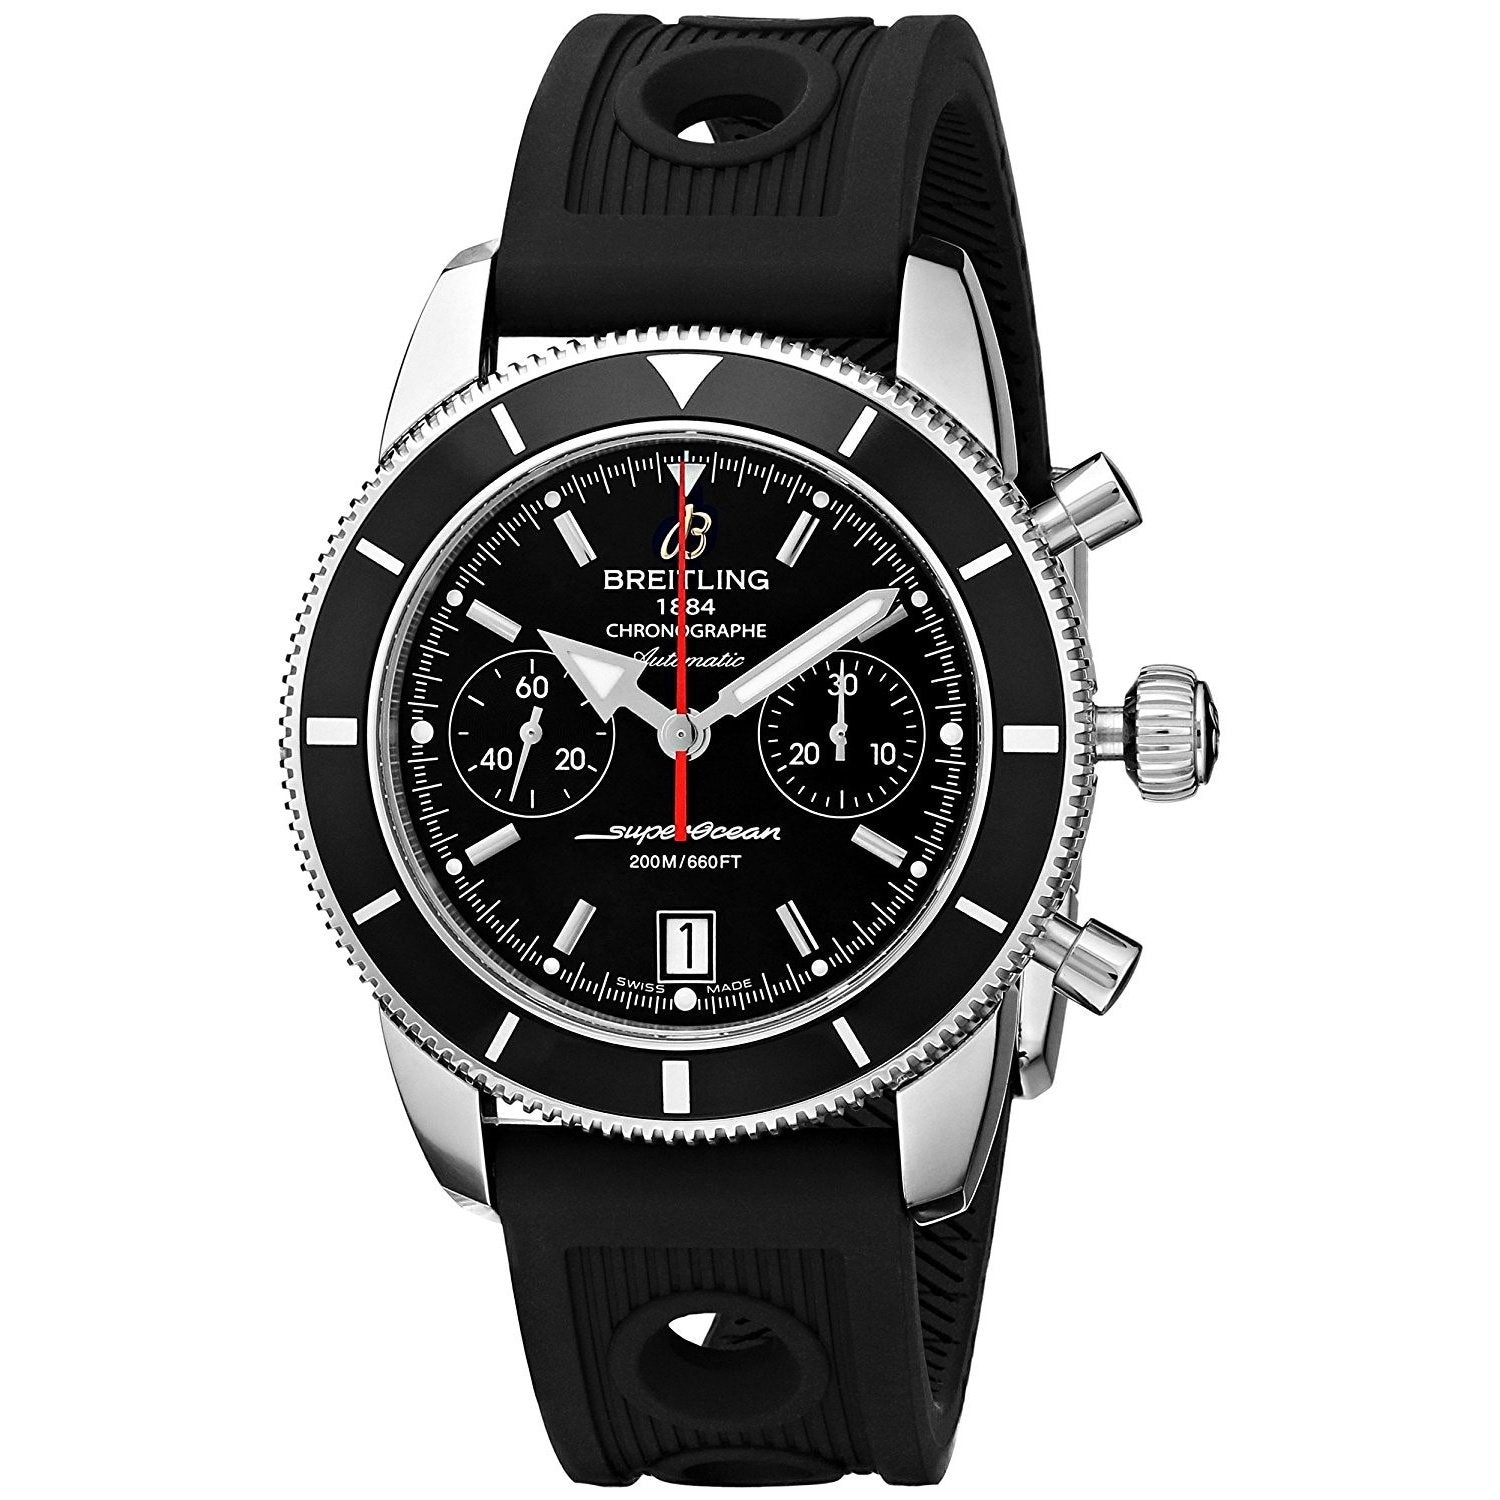 Breitling Men's A4131012-BC06LT 'Transocean 38' Automatic Chronograph Black Leather Watch